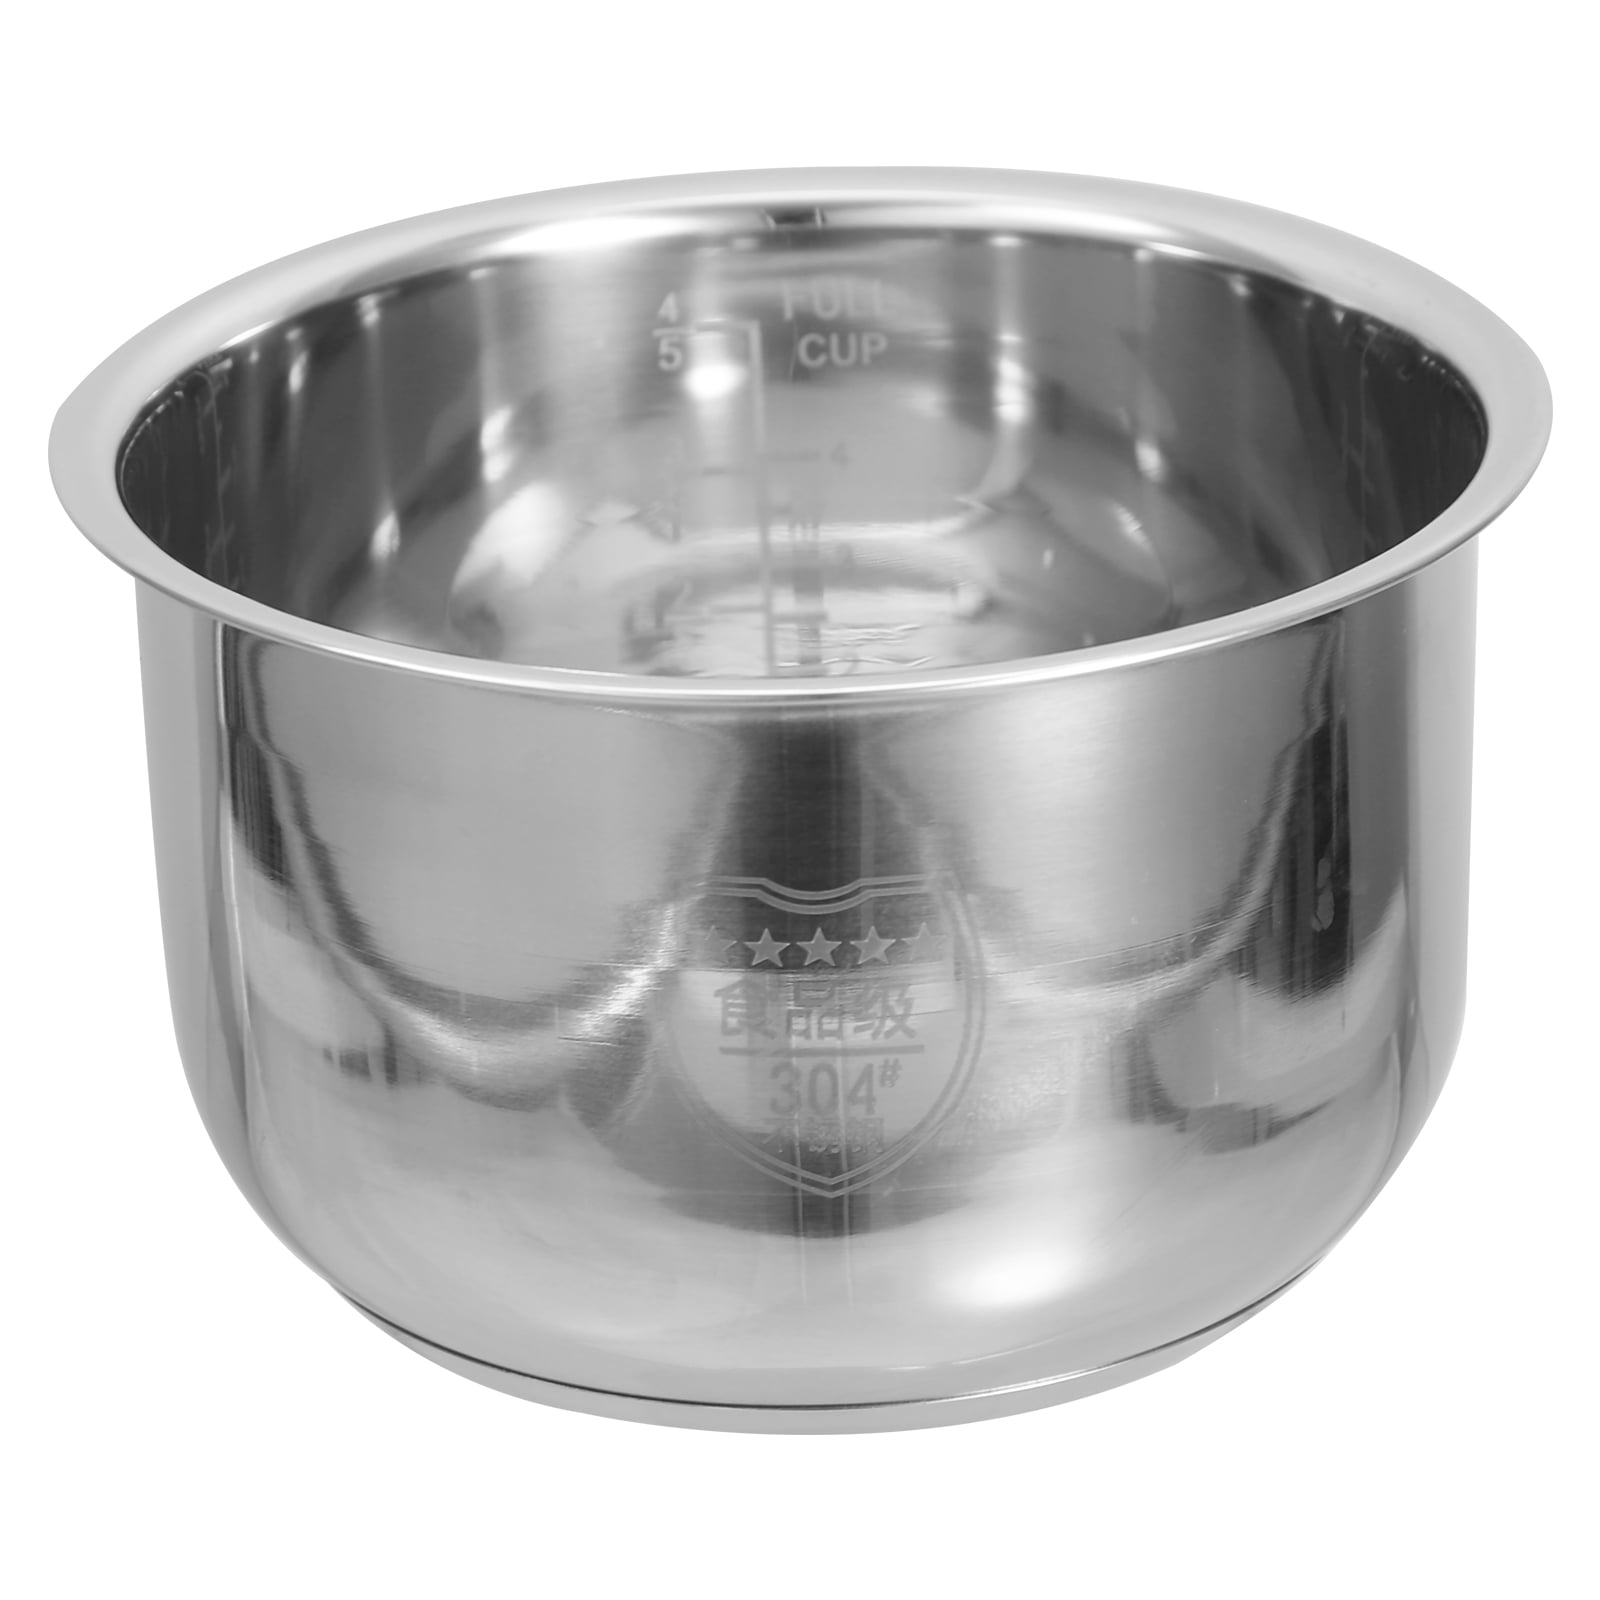 Inner Cooking Pot in stainless steal — Yedi Houseware Appliances